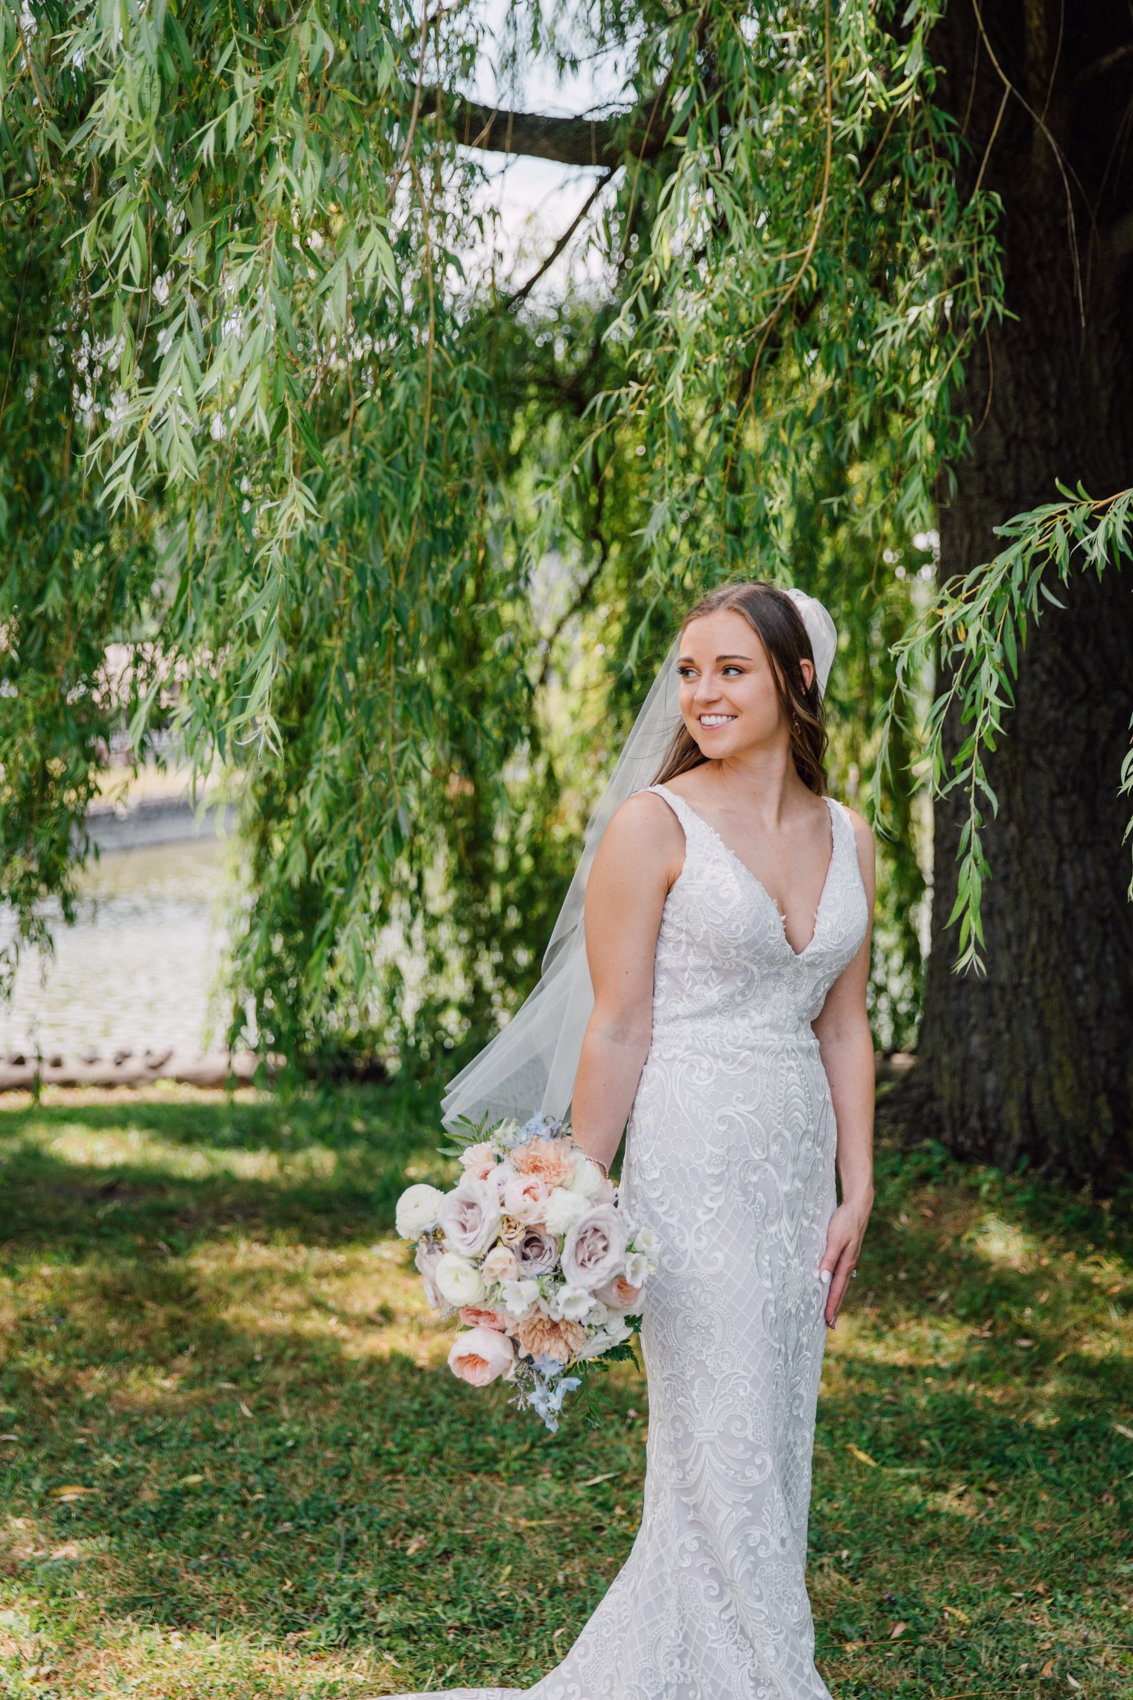  Bride smiles during wedding day portraits at Upper Onondaga Park in Syracuse NY 